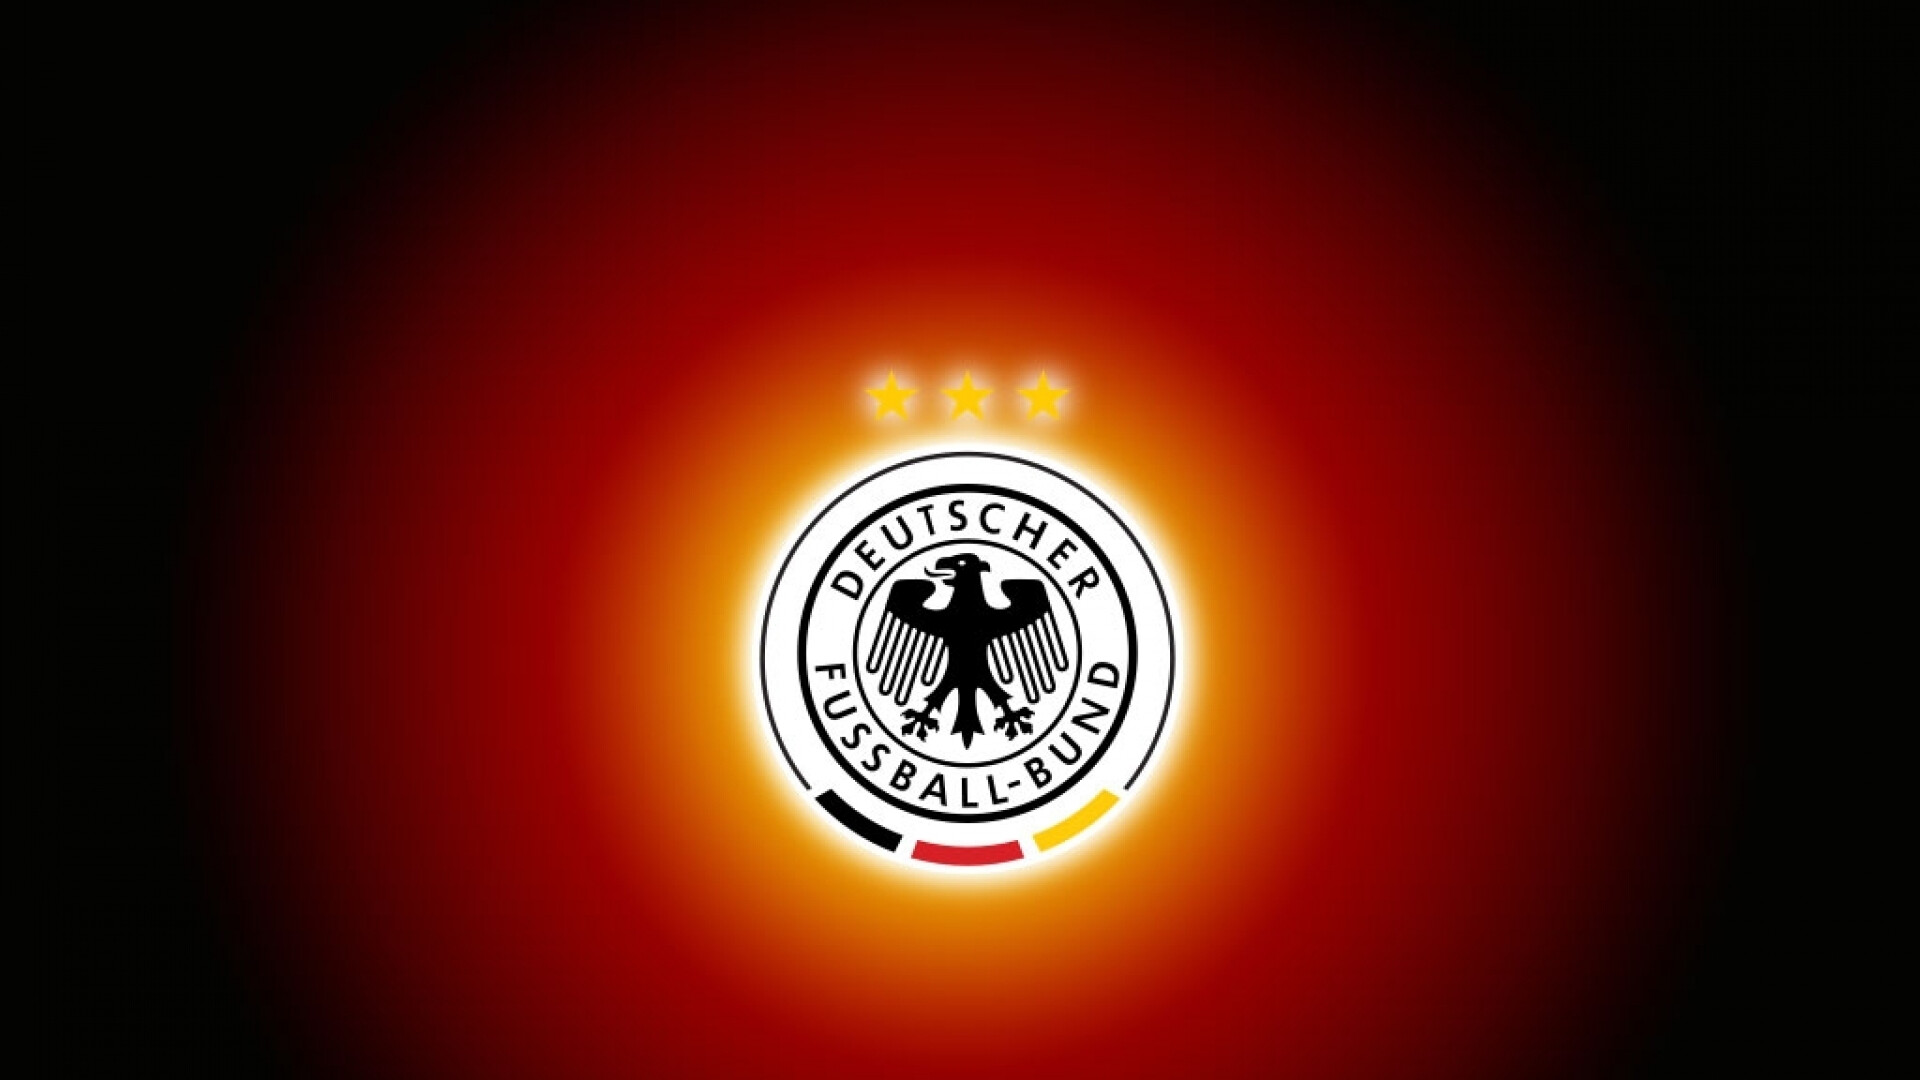 Germany Soccer Team: Emblem with three stars - the amount of World Cups won by the DFB Eleven. 1920x1080 Full HD Wallpaper.